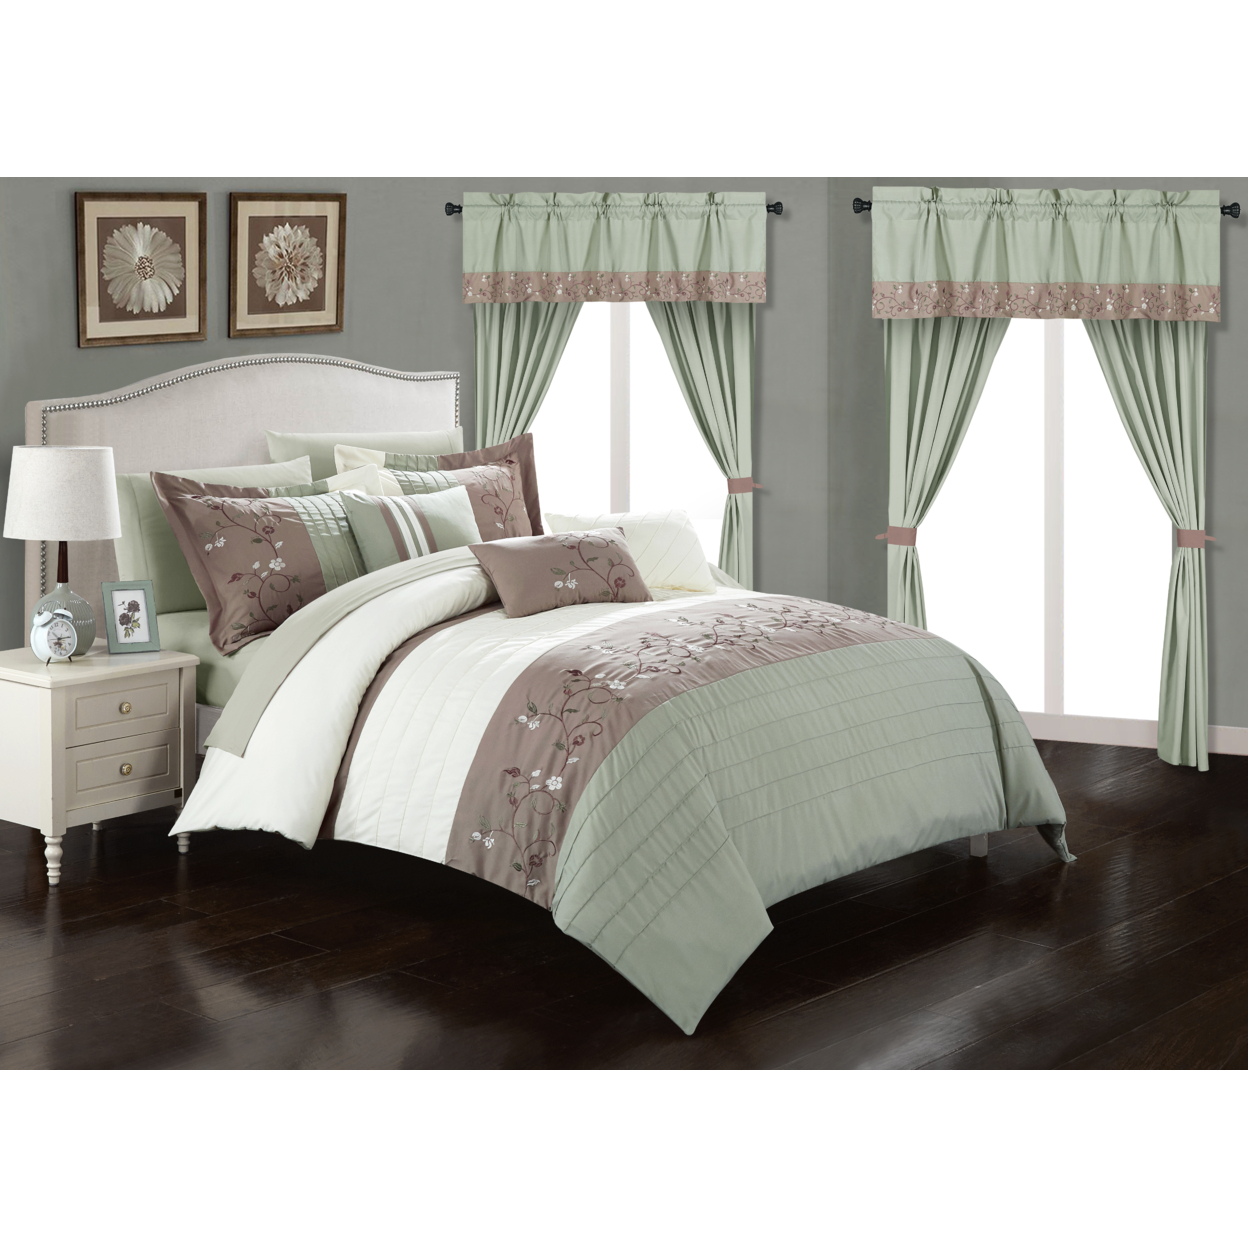 Sonita 20-Piece Bedding Set With Comforter, Sheets & Curtains, Mult. Colors - Green, Queen